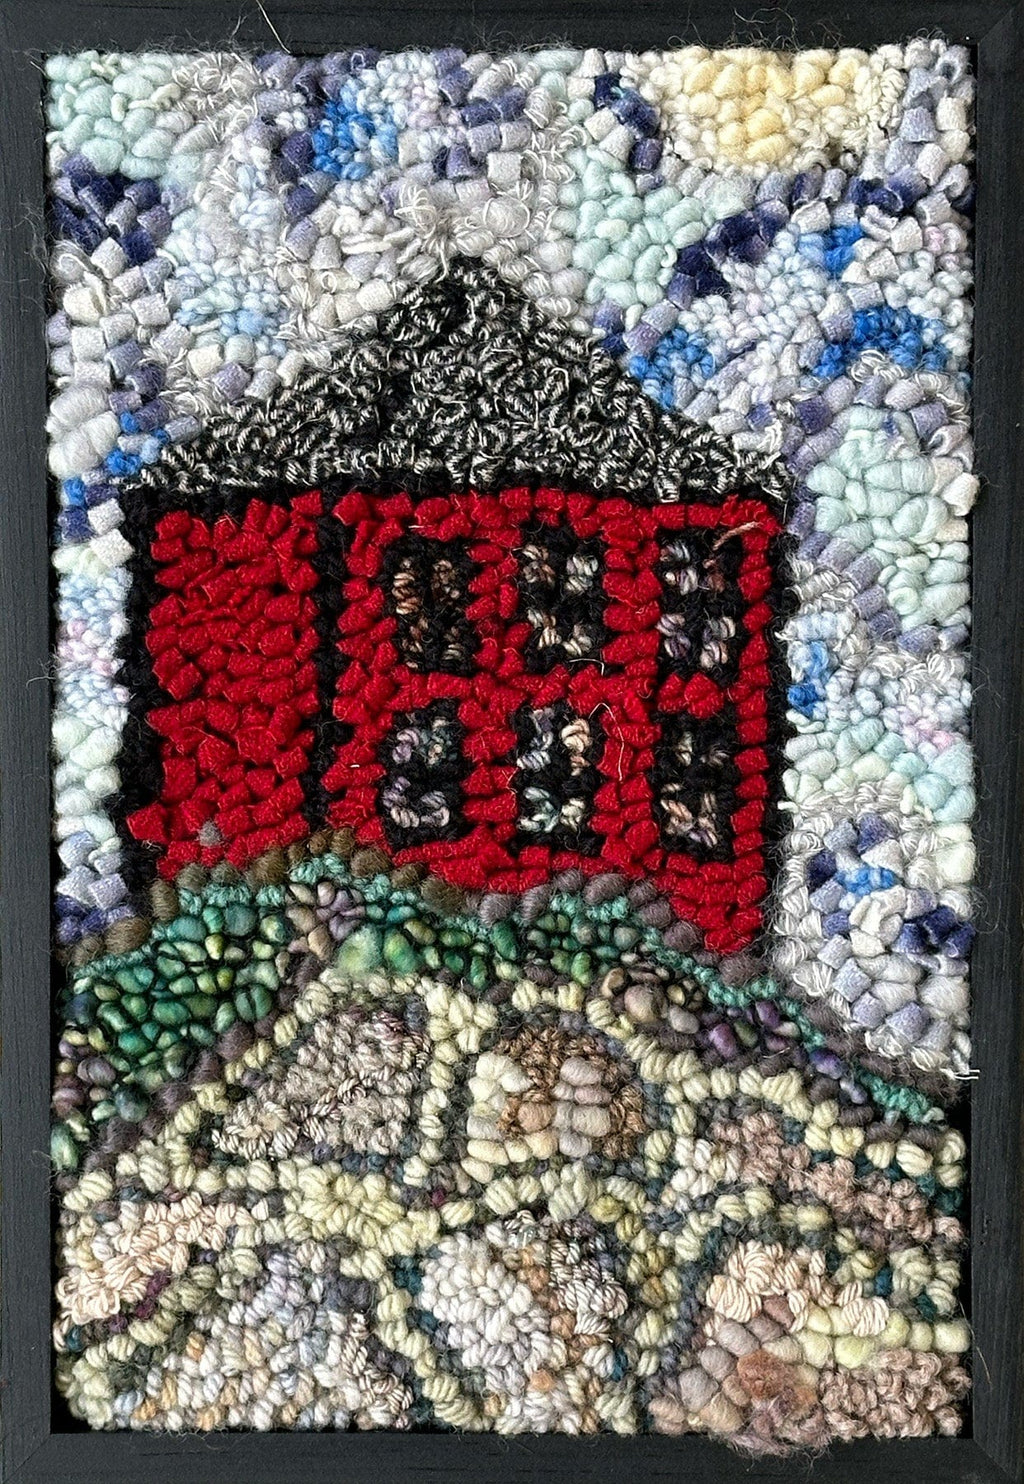 update alt-text with template House on the Cliff #1 9" x 13" Framed-Rugs for sale-Deanne Fitzpatrick Rug Hooking Studio-Rug Hooking Kit -Rug Hooking Pattern -Rug Hooking -Deanne Fitzpatrick Rug Hooking Studio -Is rug hooking the same as punch needle?